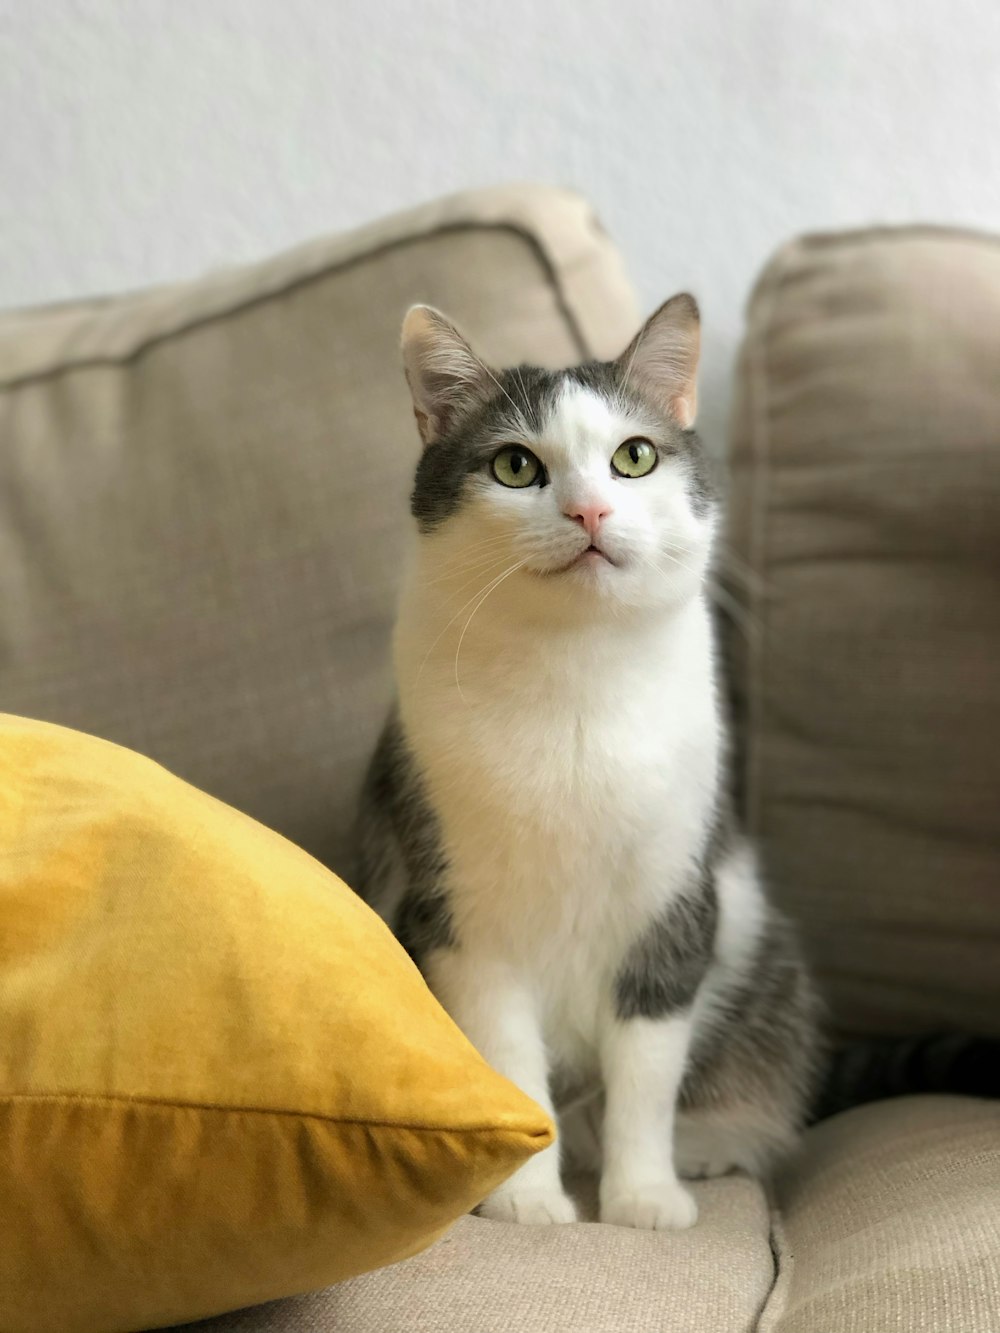 short-furred gray and white cat on sofa